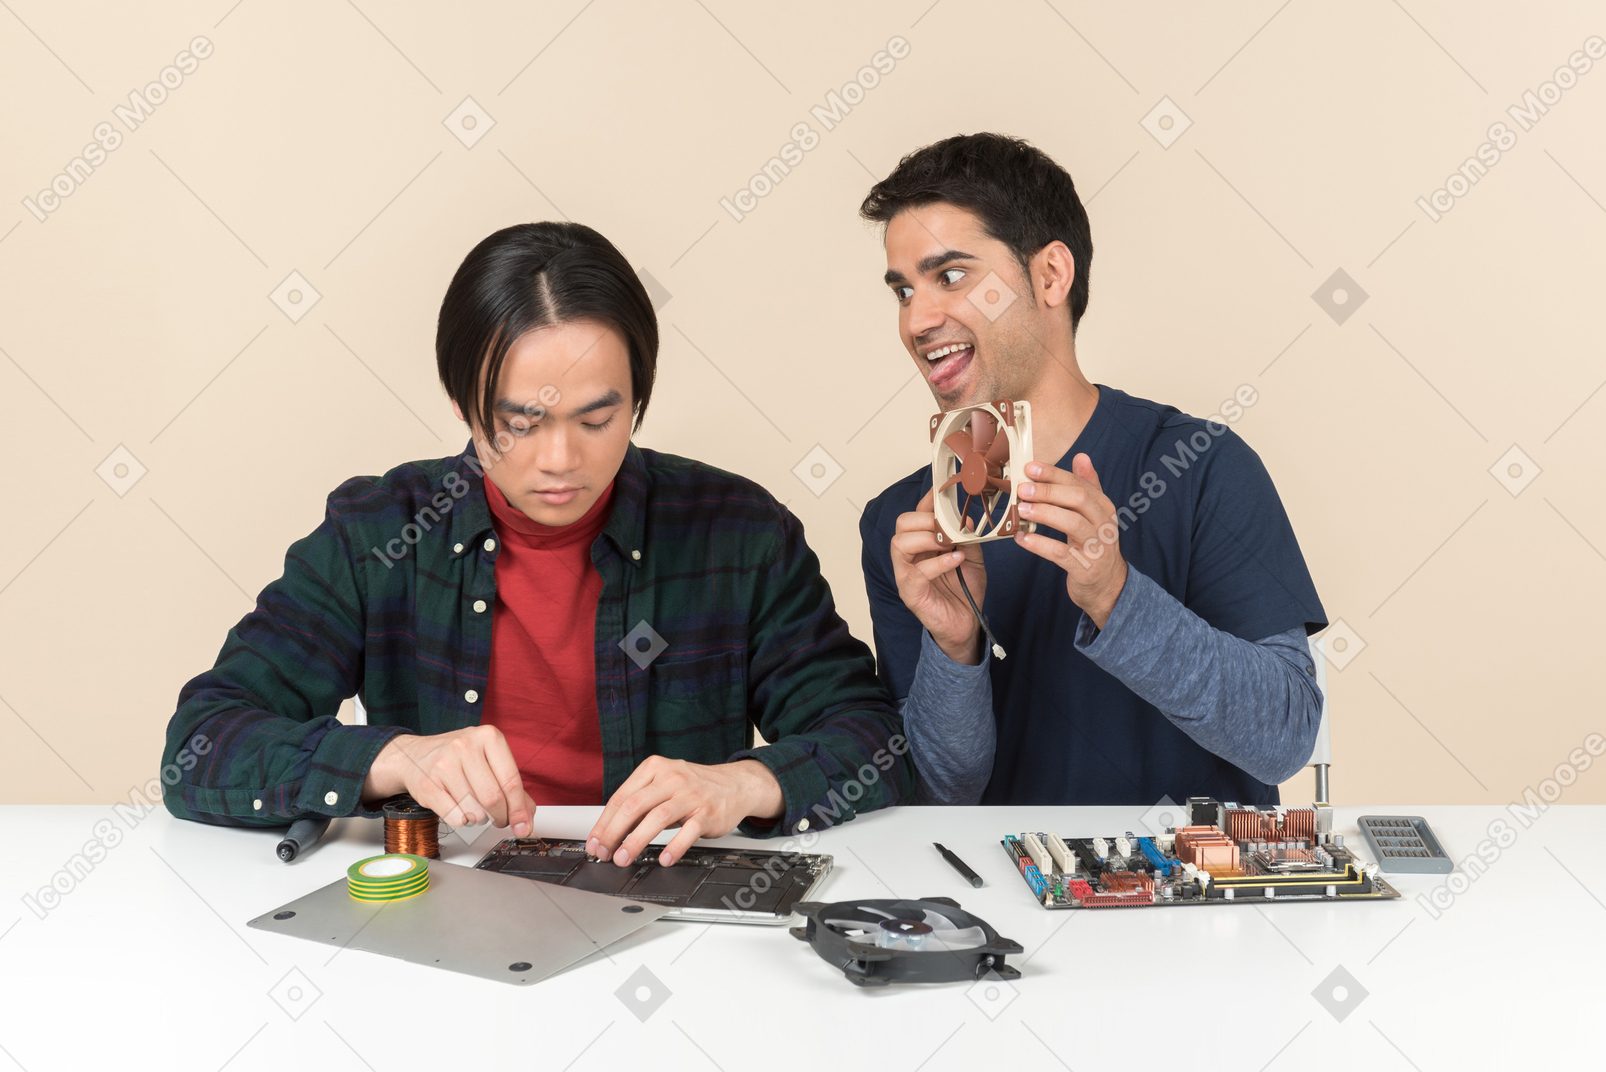 Two young geeks sitting at the table with details on it and one of them is fooling around